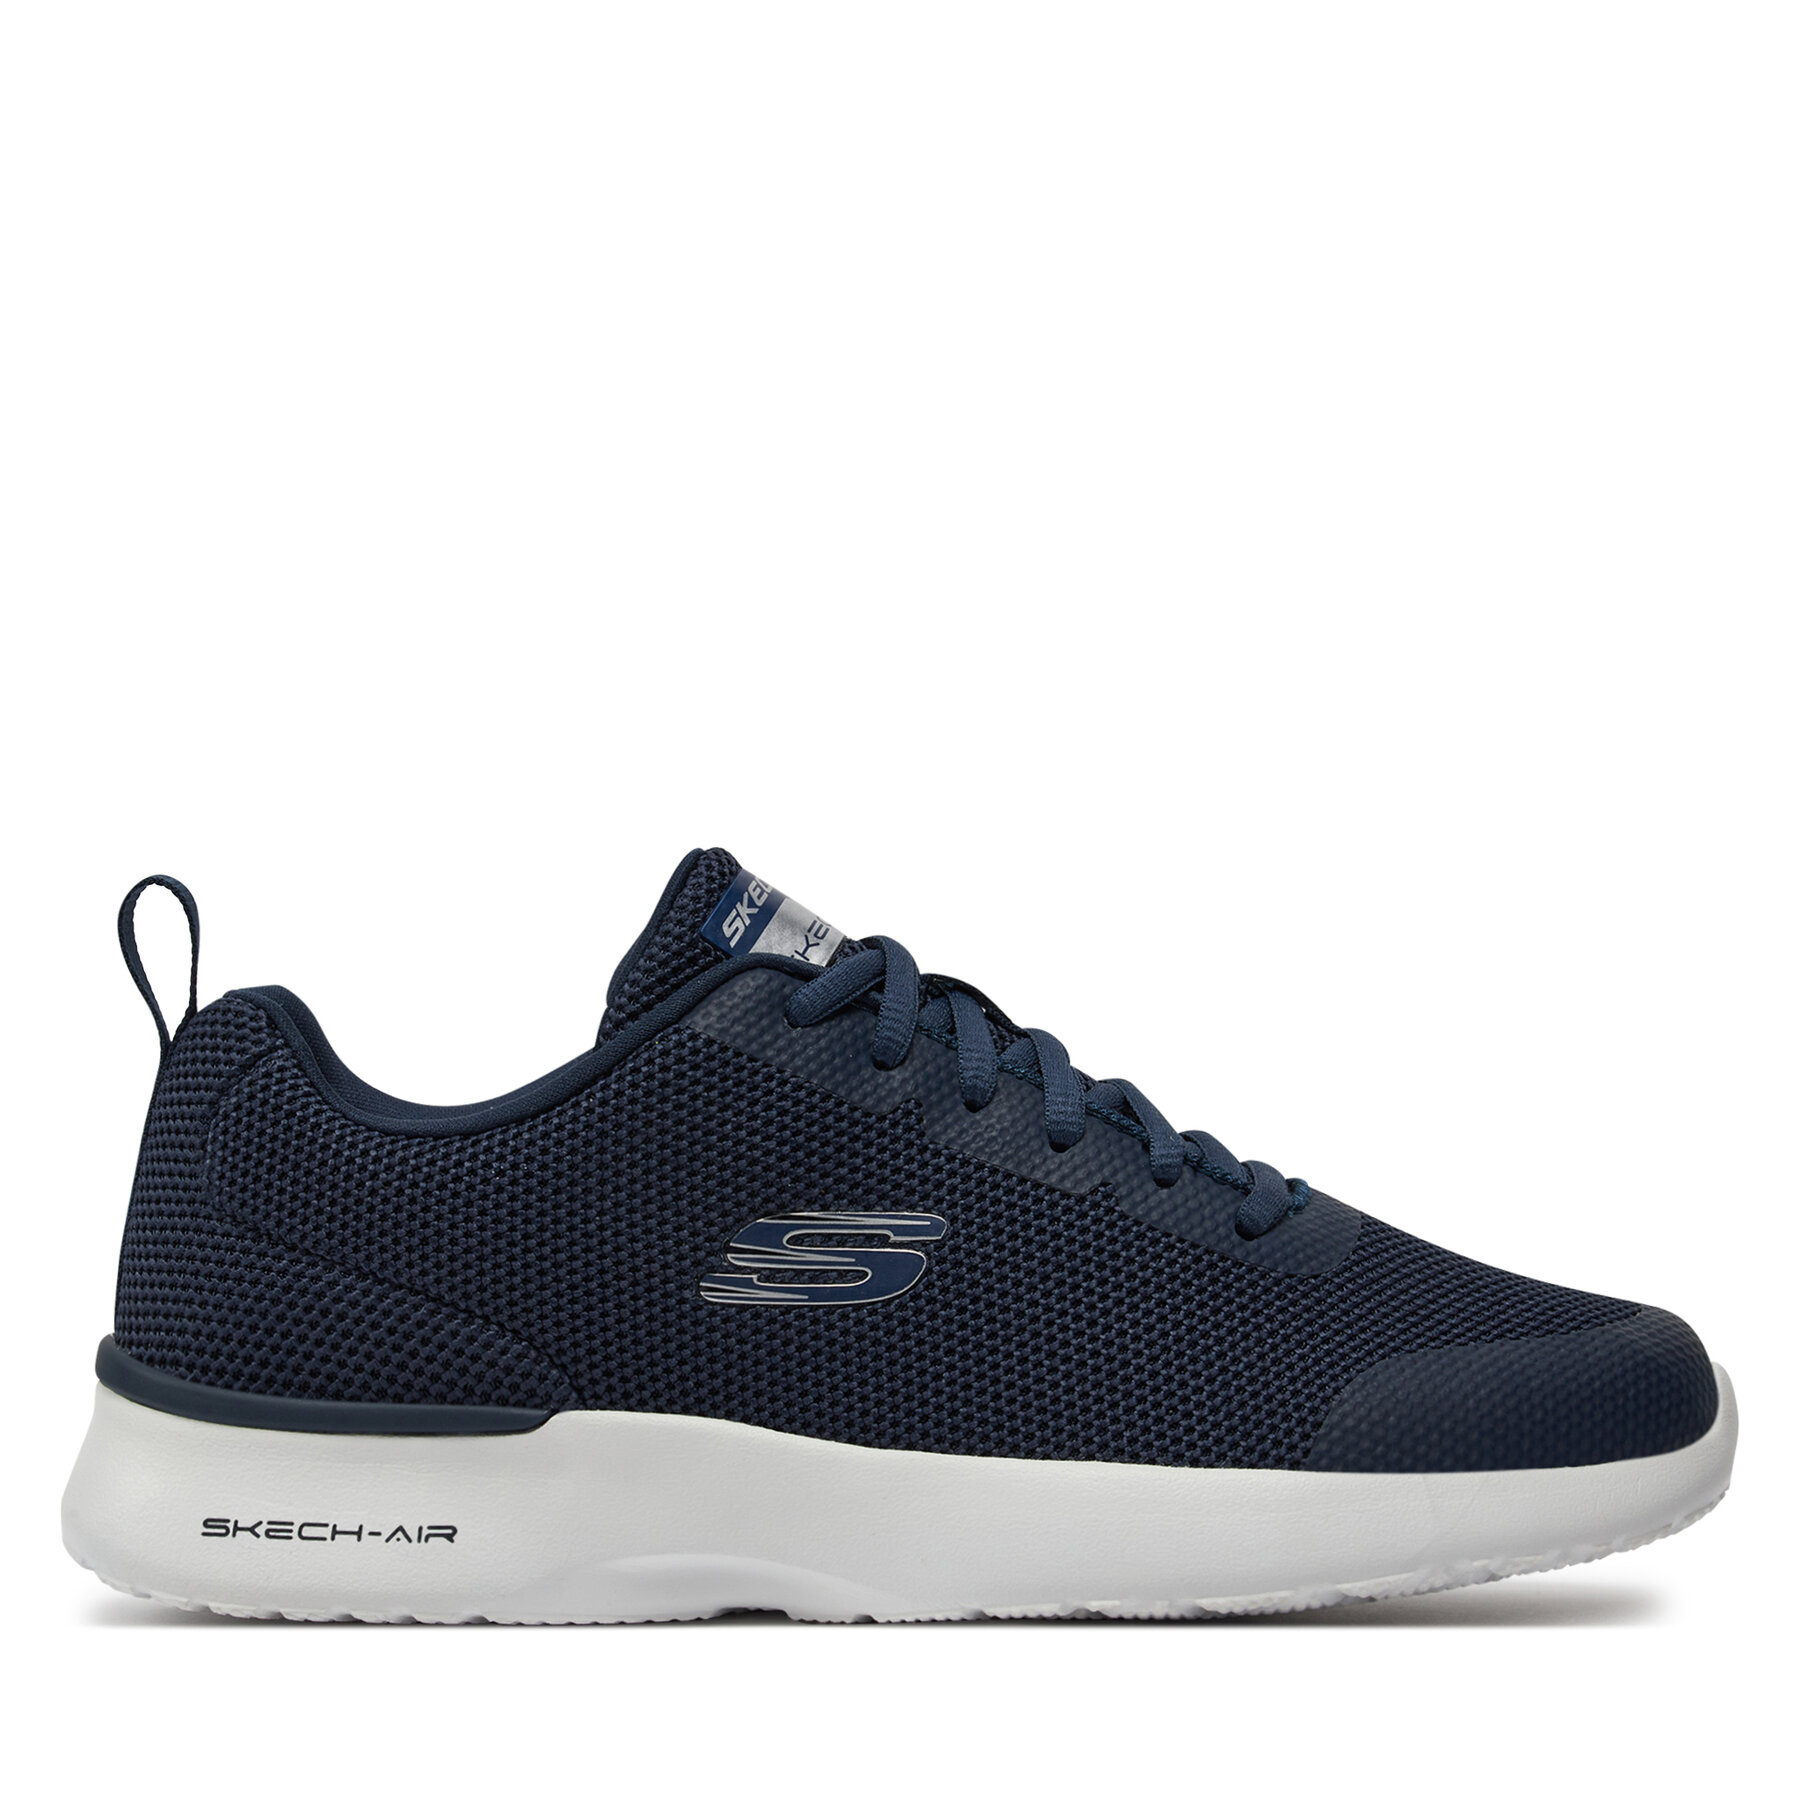 Skechers Skech-Air Dynamight Winly navy